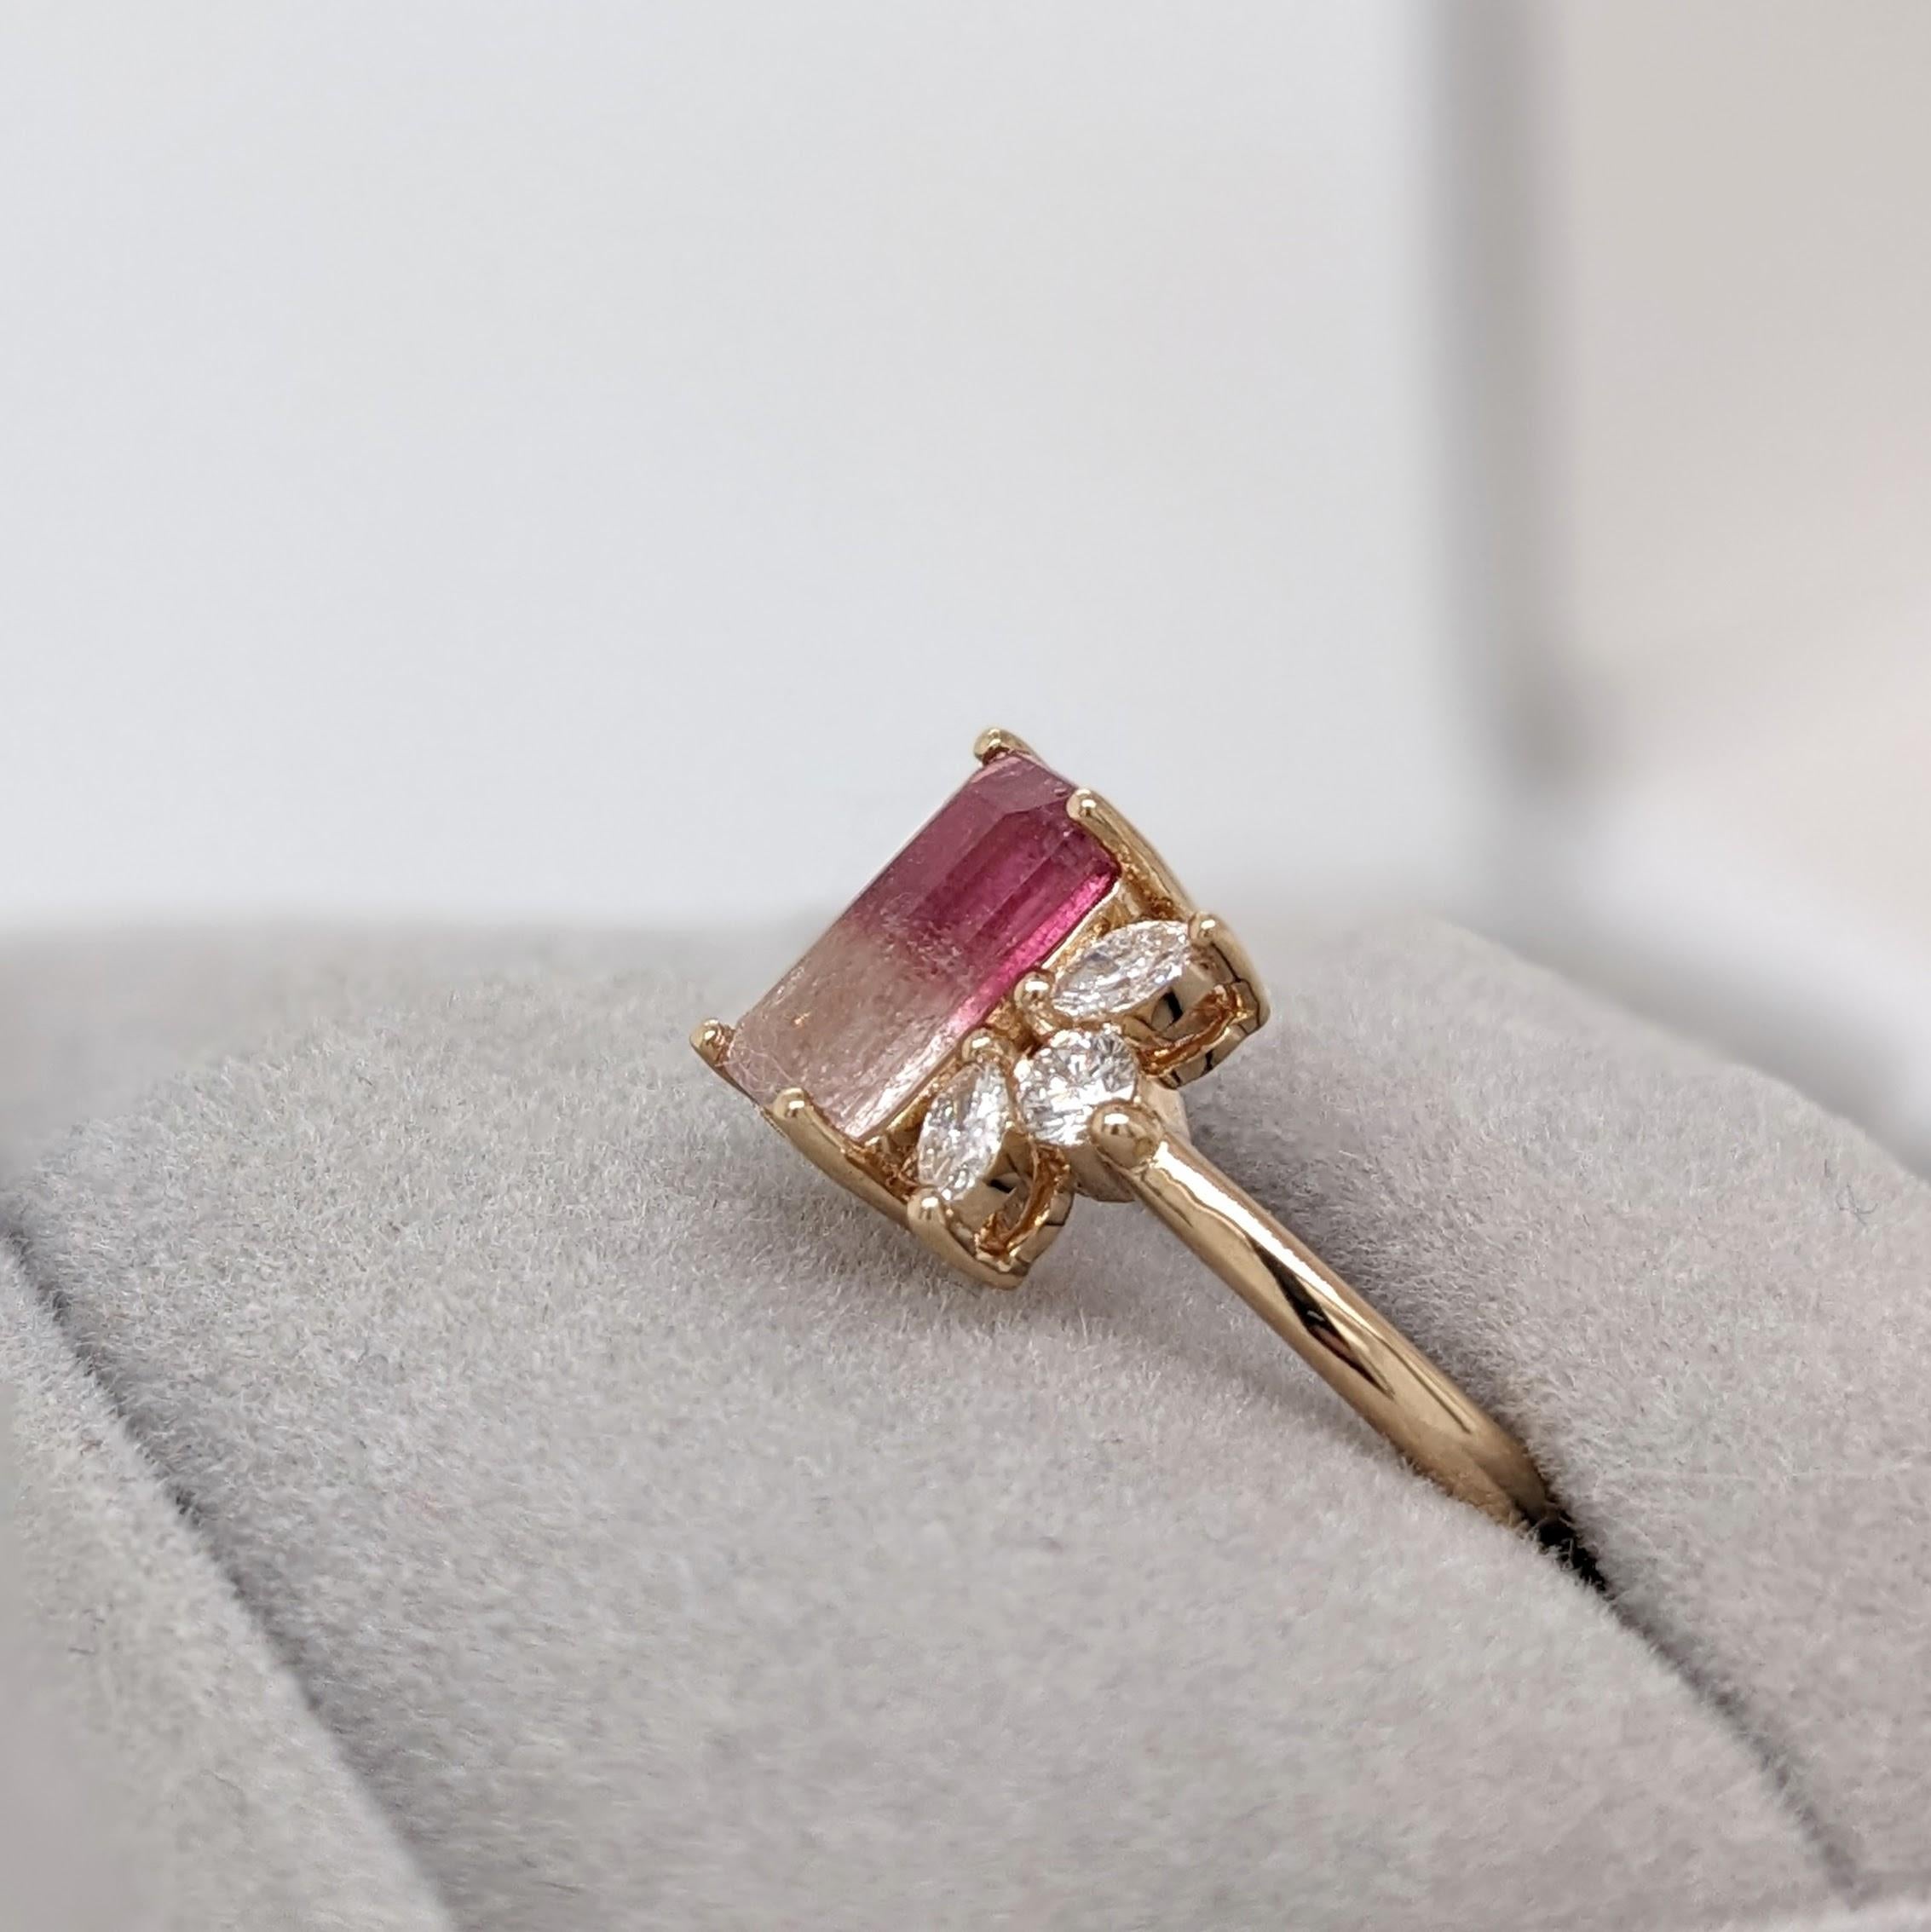 1.42ct Tourmaline w Diamond Accents in Solid 14K Yellow Gold Emerald Cut 8.8x5mm For Sale 6